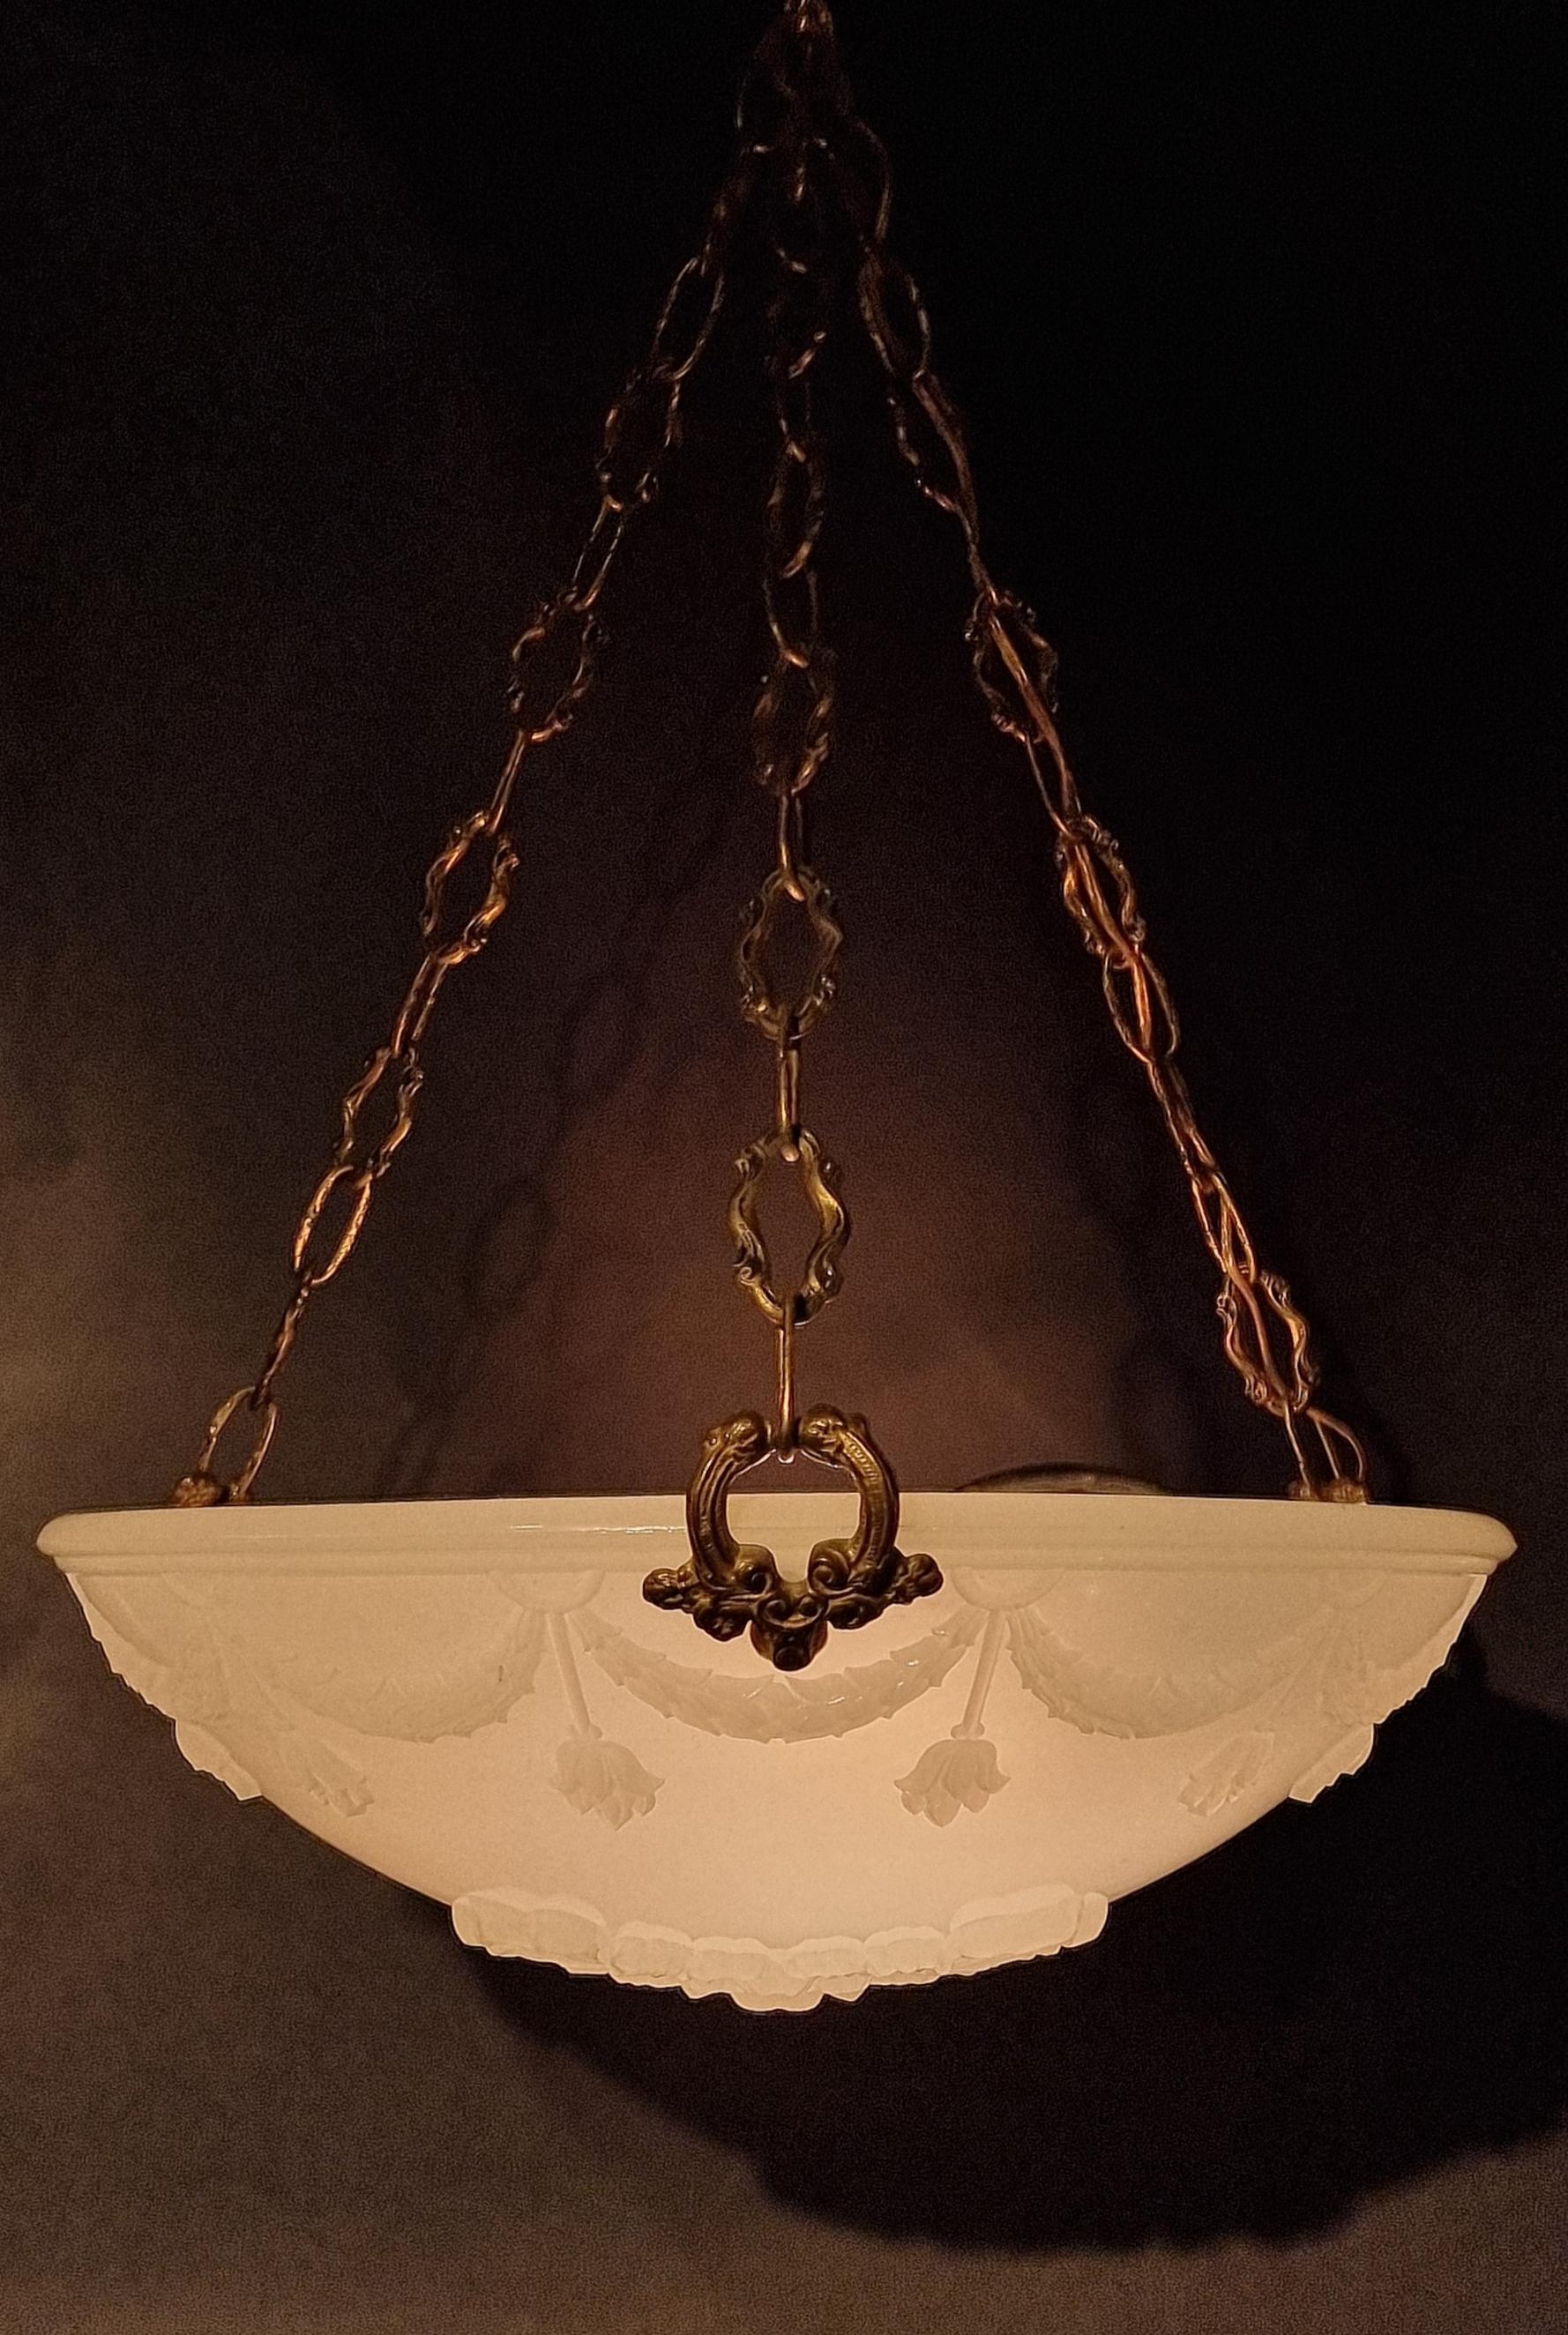 Jefferson Moonstone Glass Hanging Ceiling Lamp, English, 20th Century.

Relief Moulded With Floral Boss, Swag Borders,
With Three Gilt Metal Mounts and Suspension Chains,
Moulded Mark of Jefferson #6030.
Two Socket Fixture.

Dimensions:
Hangs 35